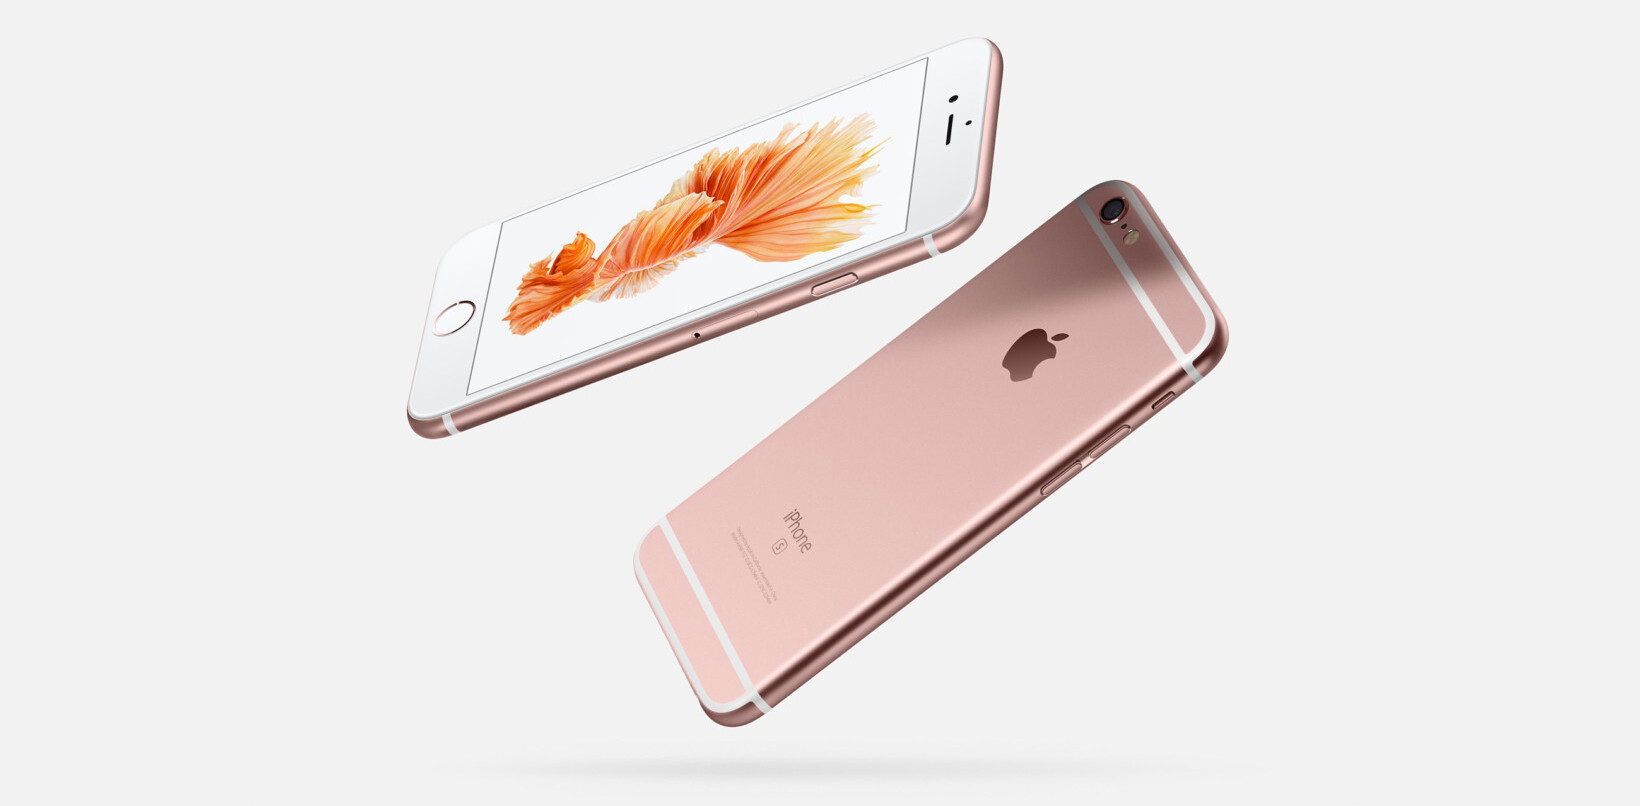 iPhone 6S battery issues may be more widespread than Apple initially thought